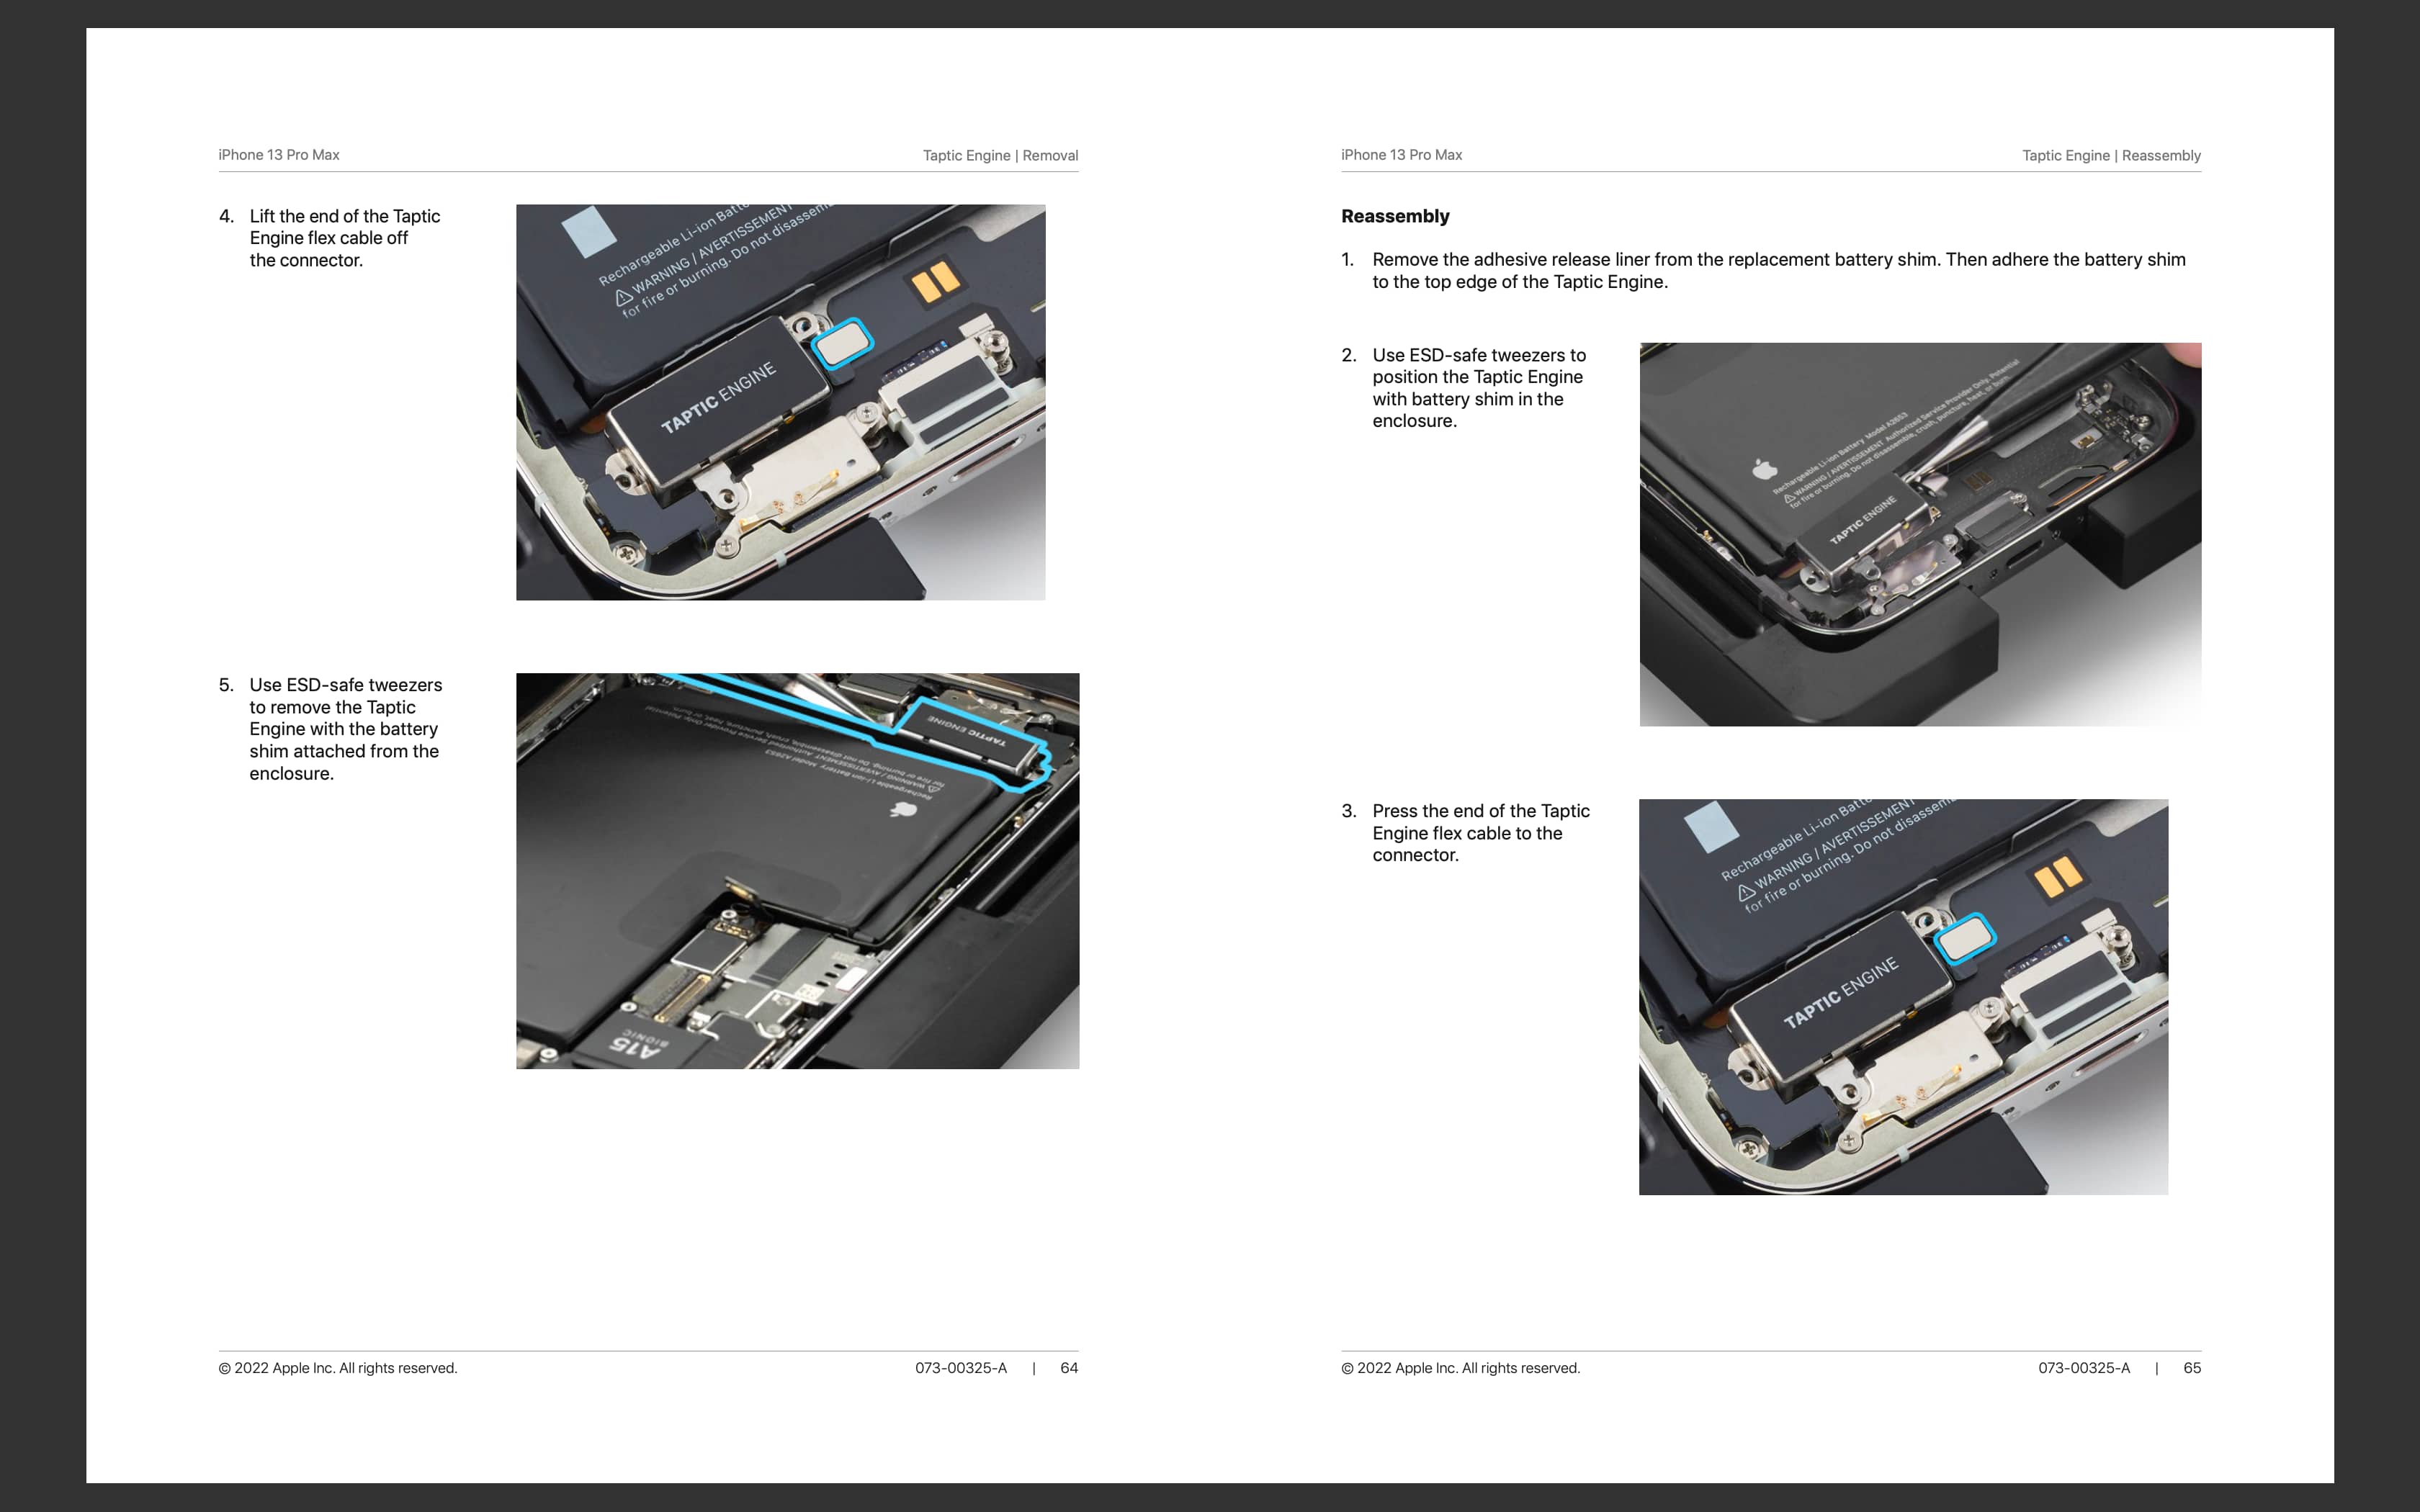 A screenshot from Apple's service manual for the iPhone 13 Pro Max showing the steps to replace the Taptic Engine